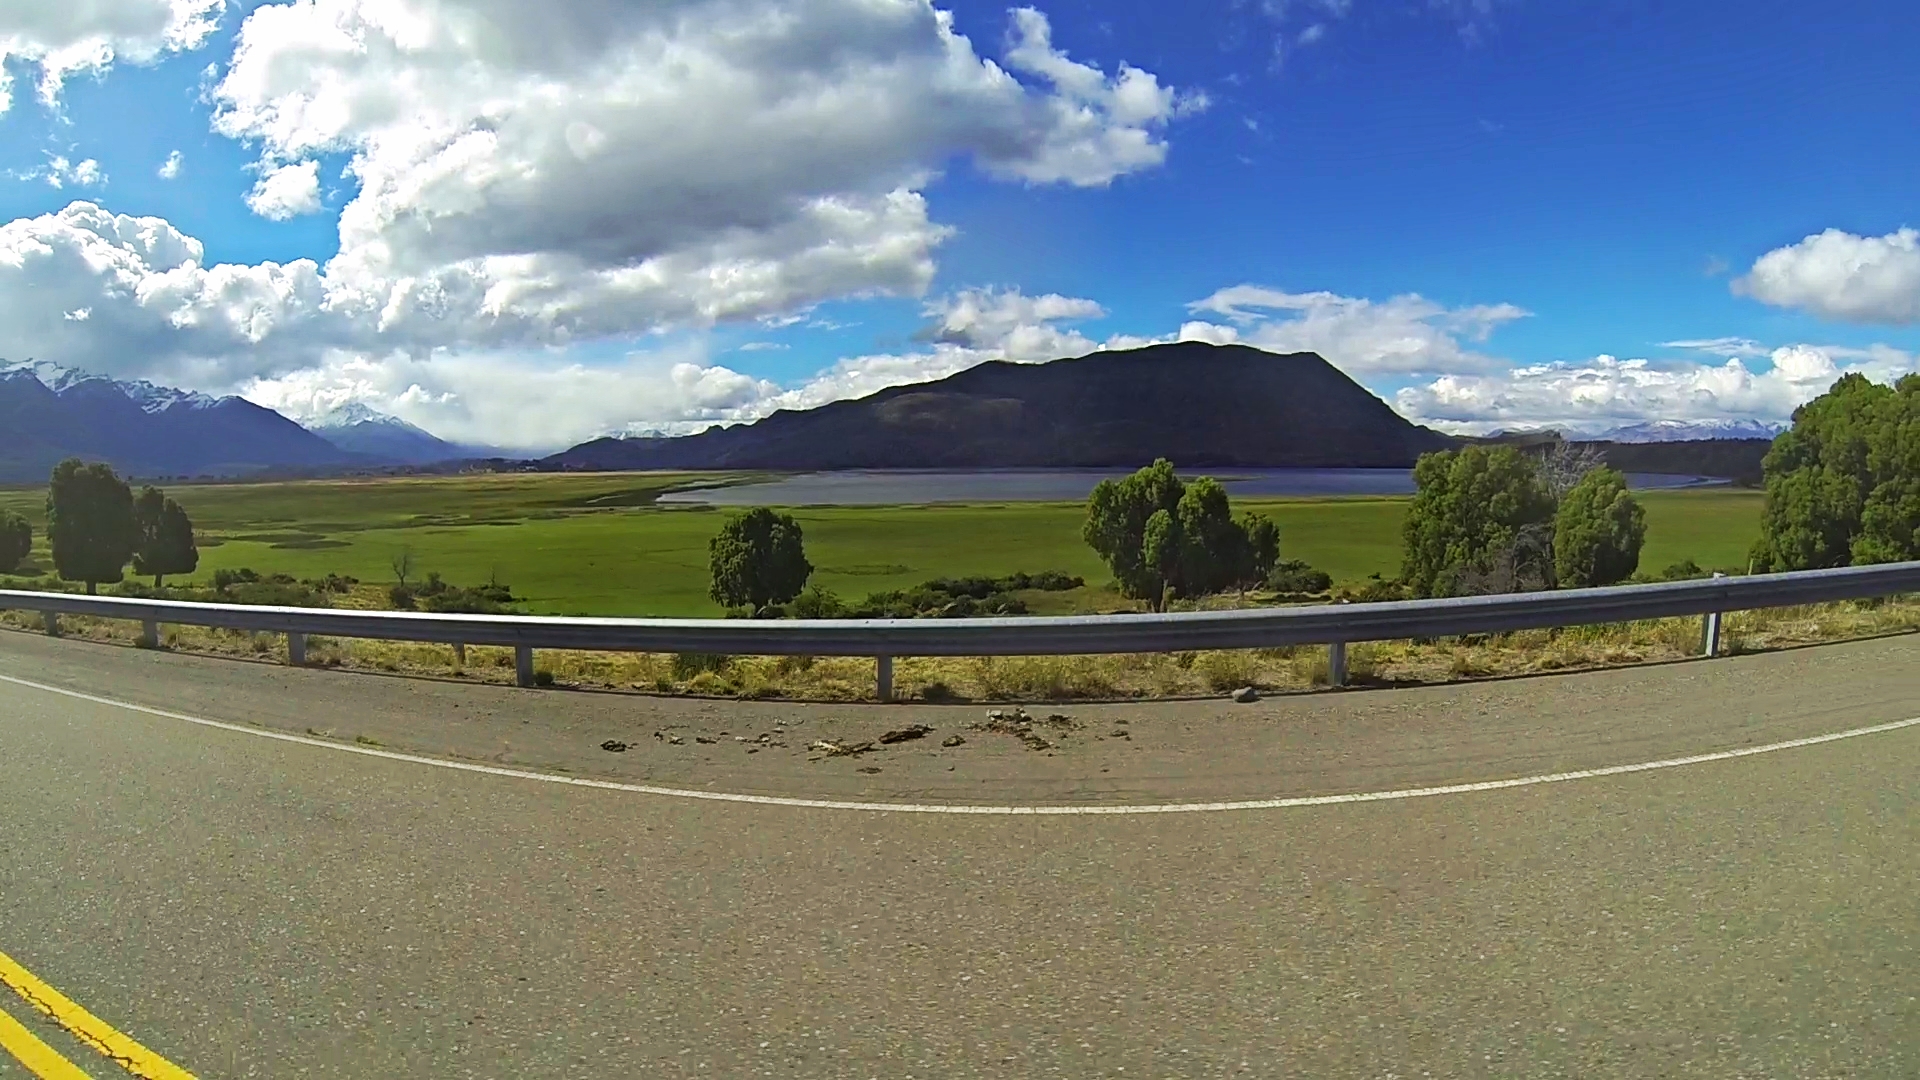  A "boring" highway view by Patagonian standards 